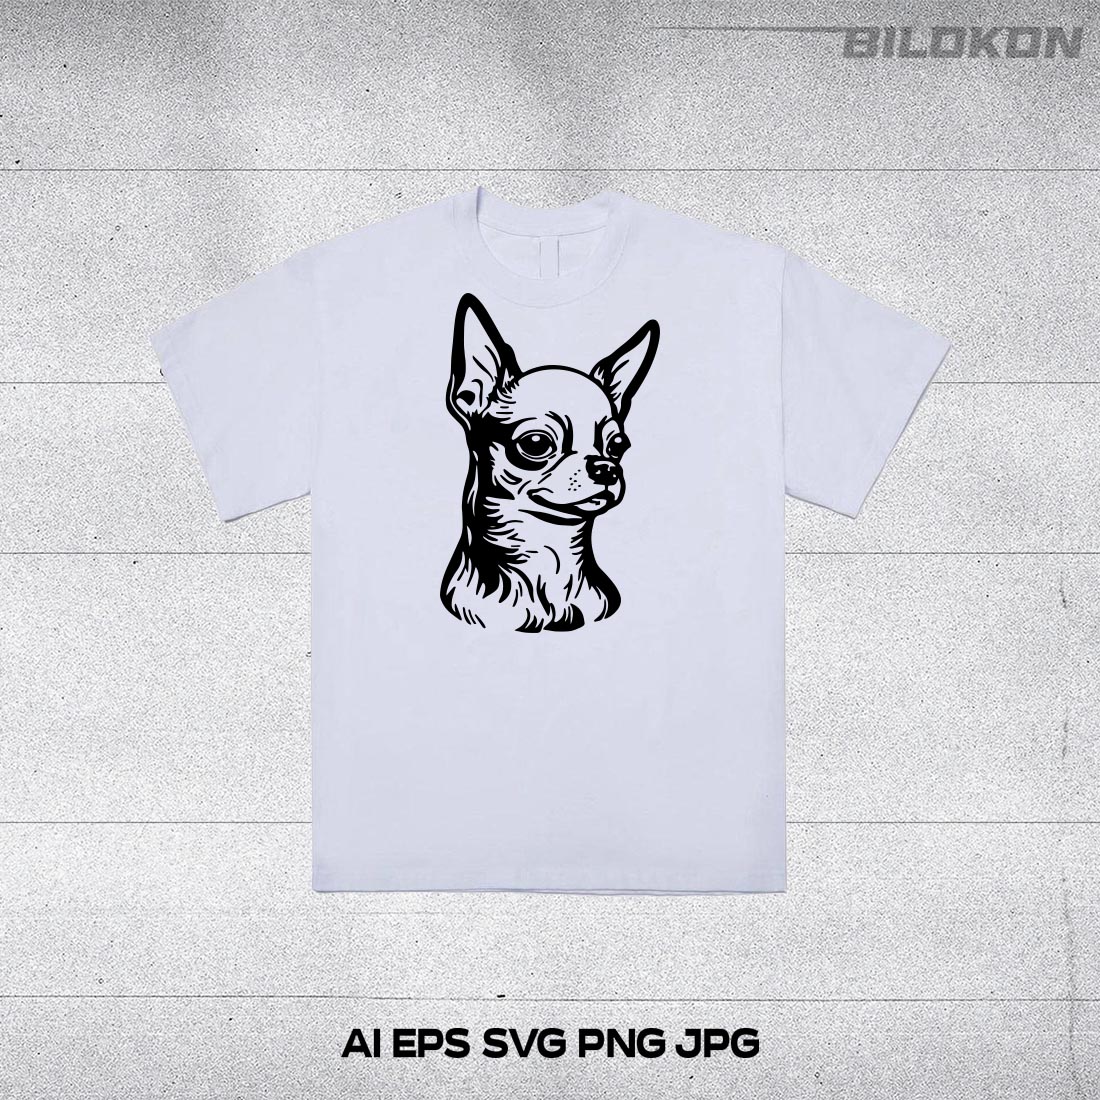 Chihuahua dog face, SVG, Vector, Illustration preview image.